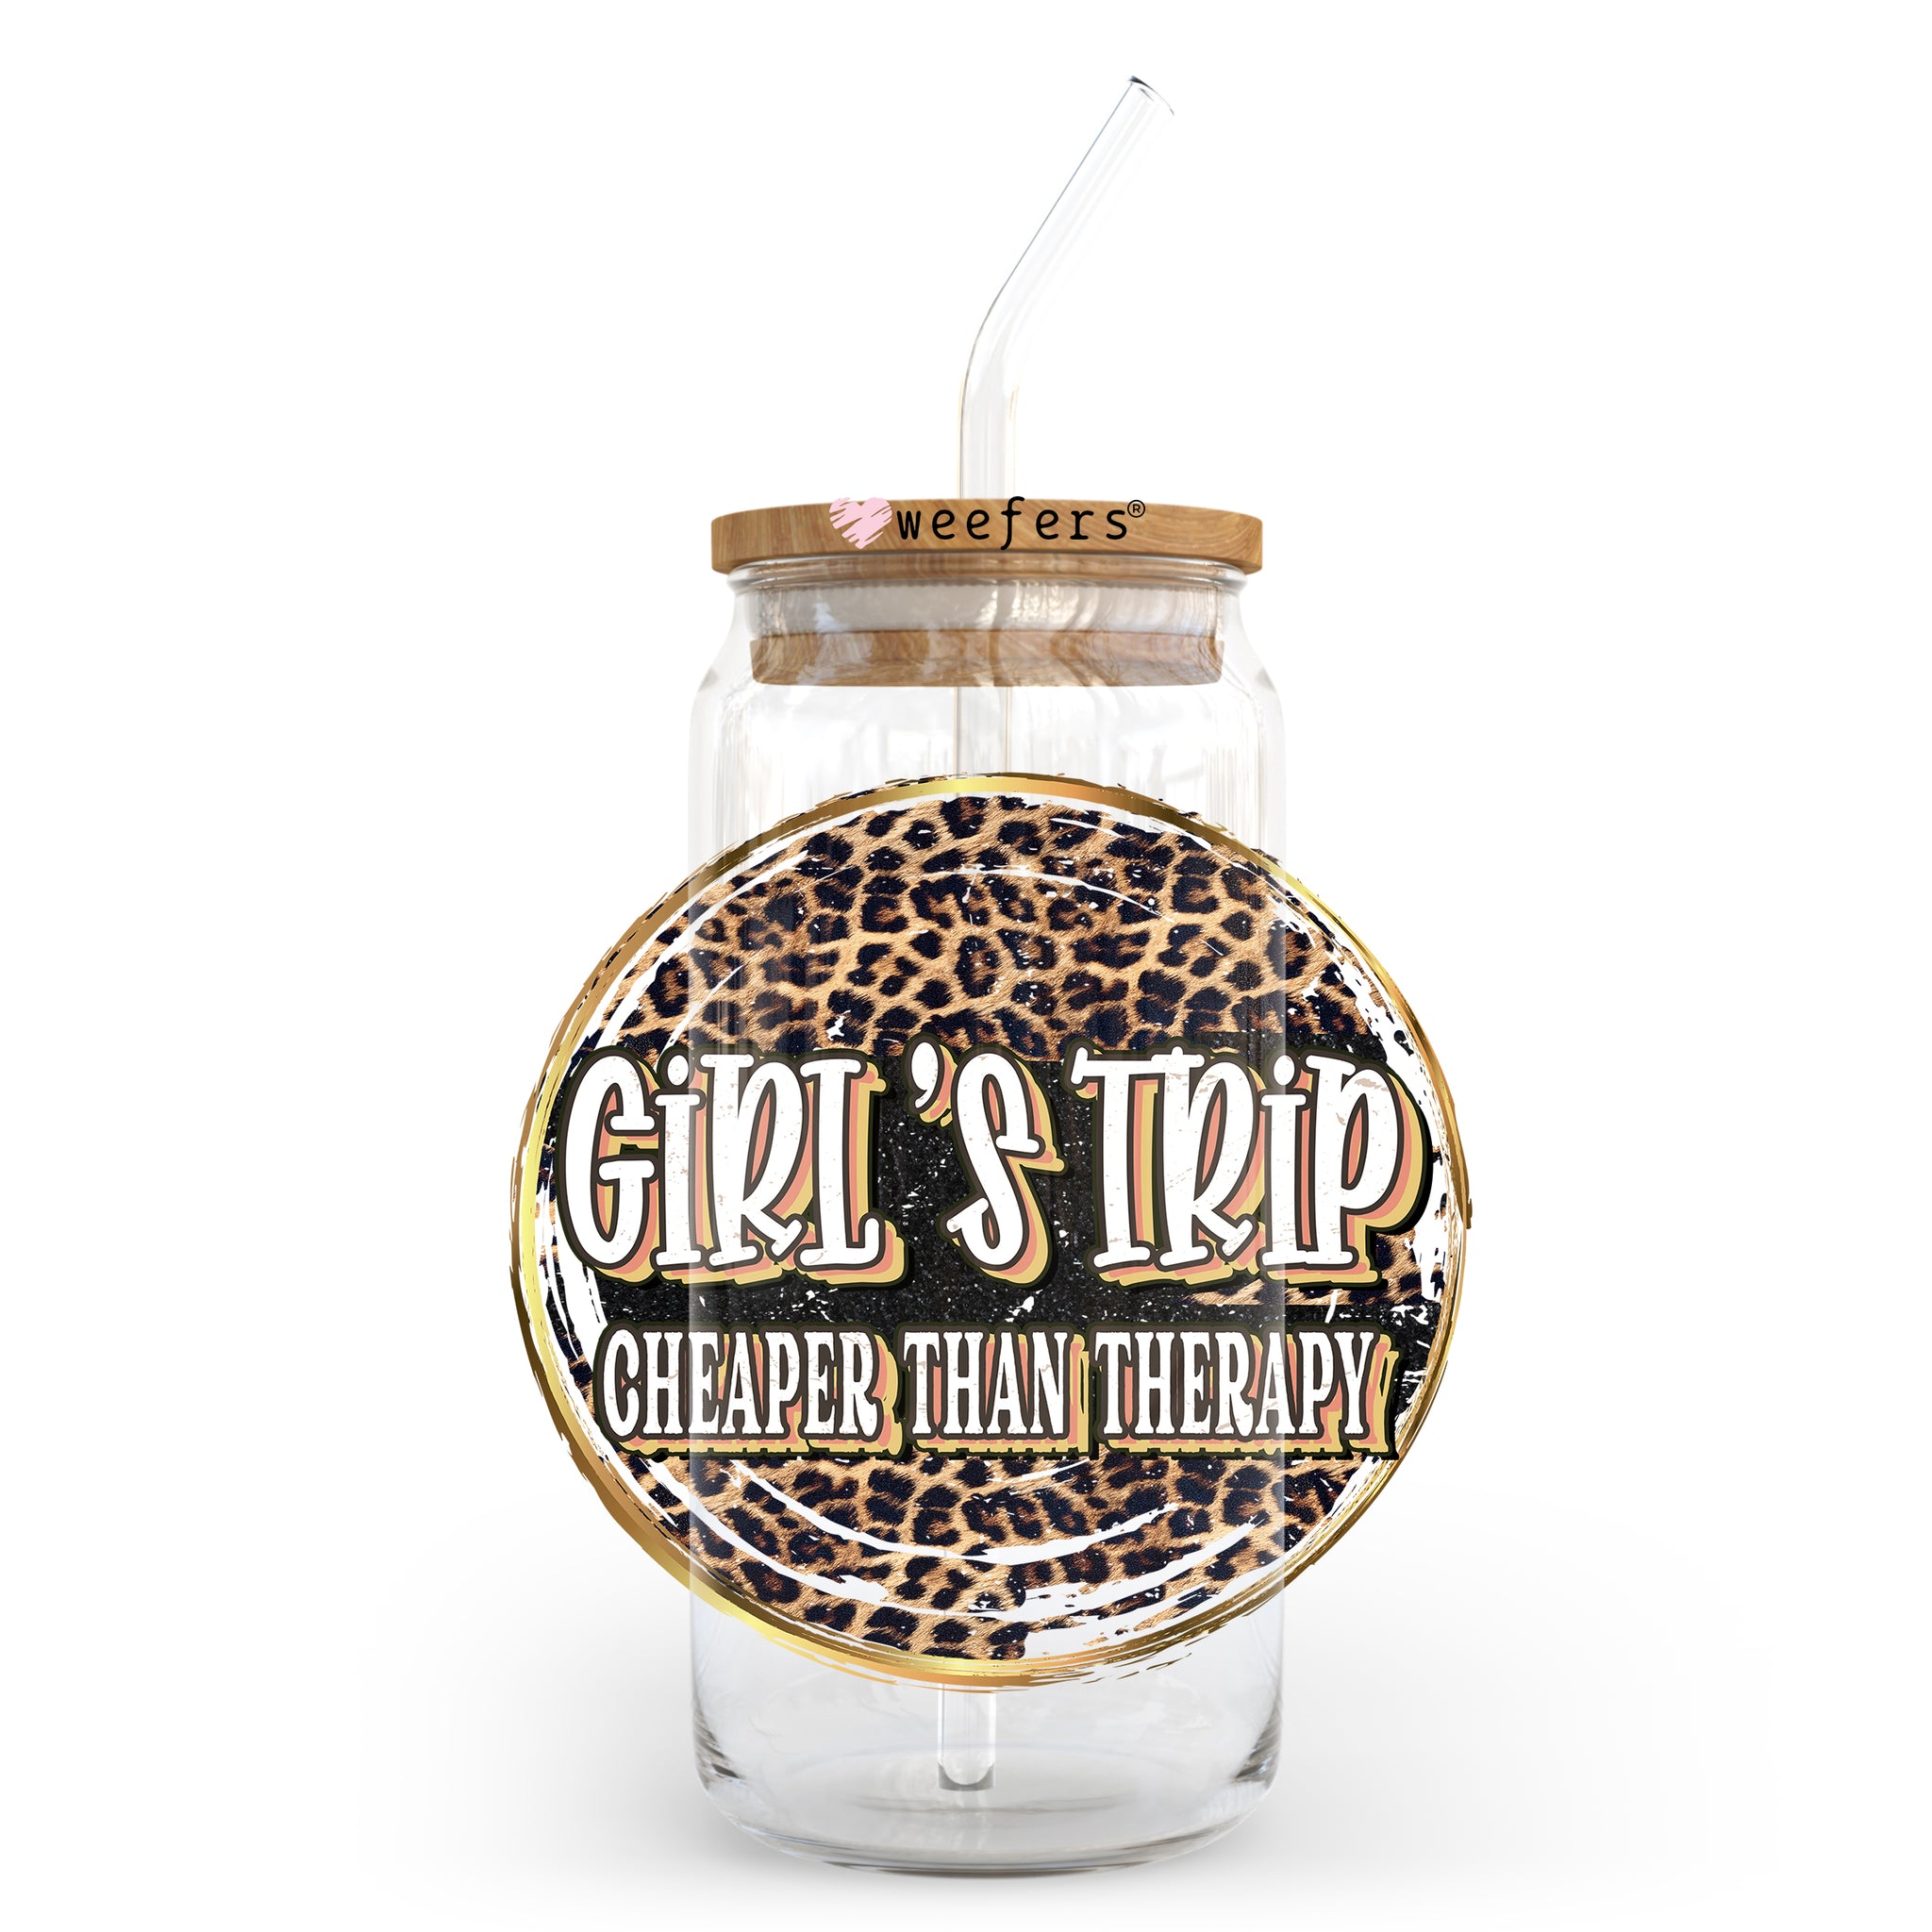 Girls are Mean - UVDTF Beer Can Glass Wrap (Ready-to-Ship) – Happy Wrap Co.